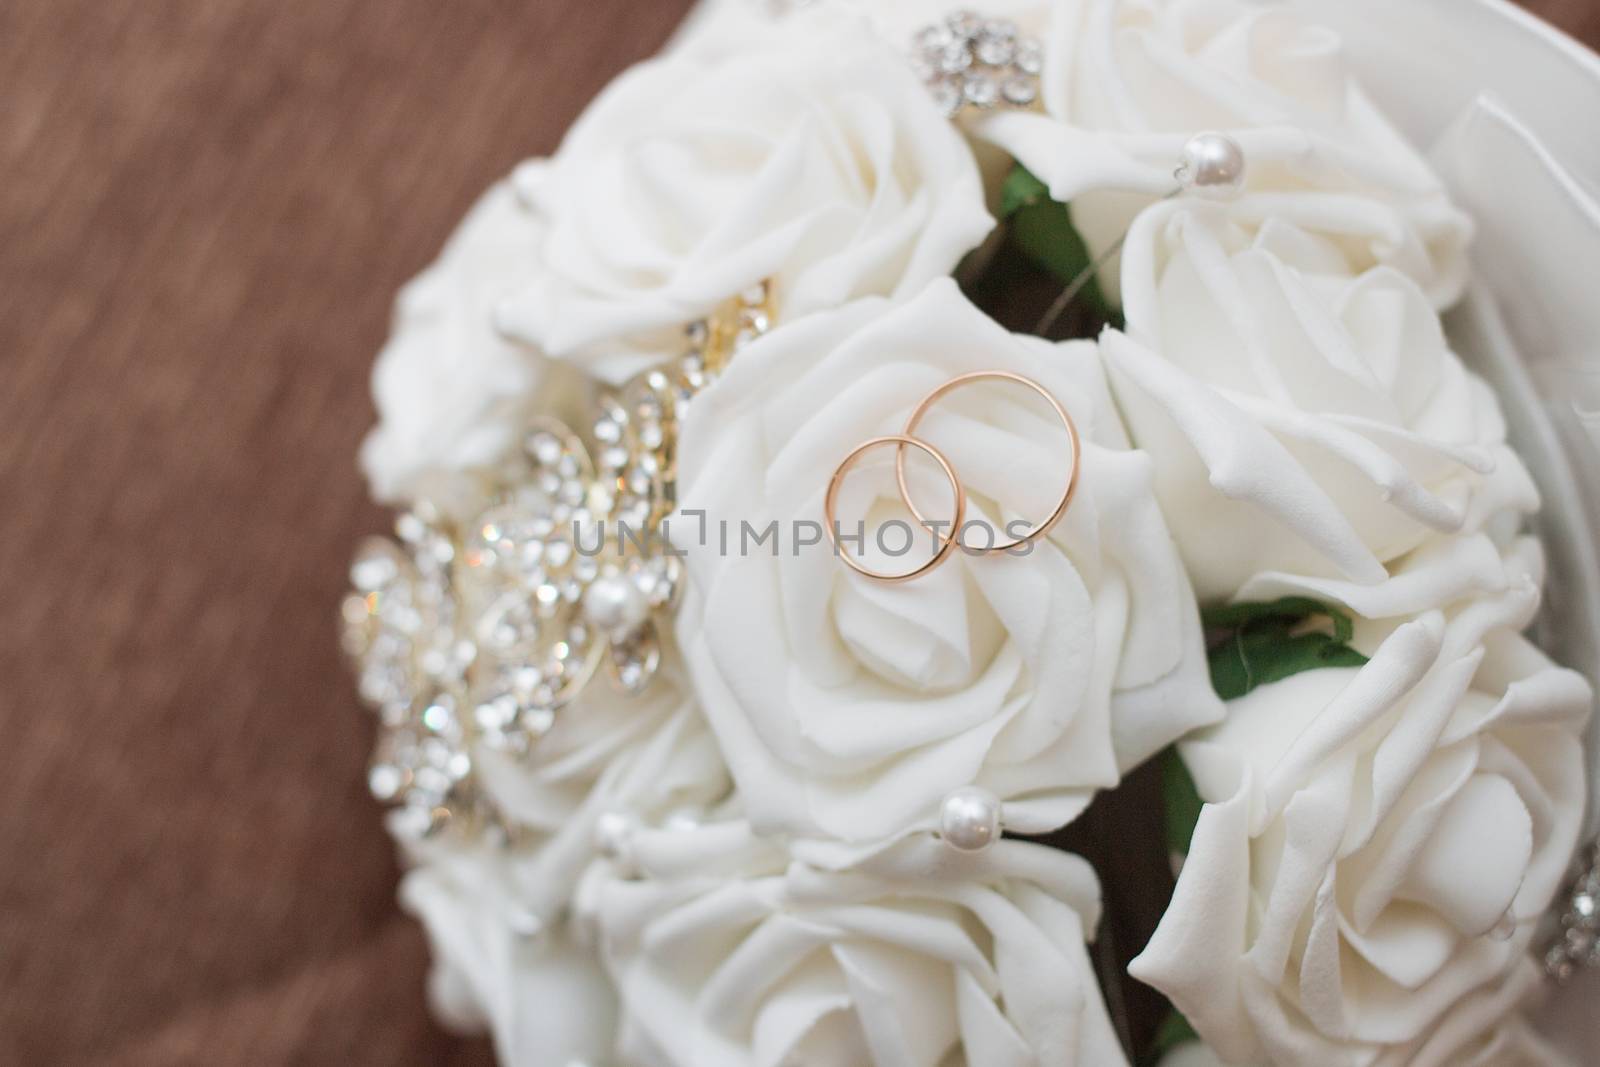 Beautiful wedding bouquet and rings.